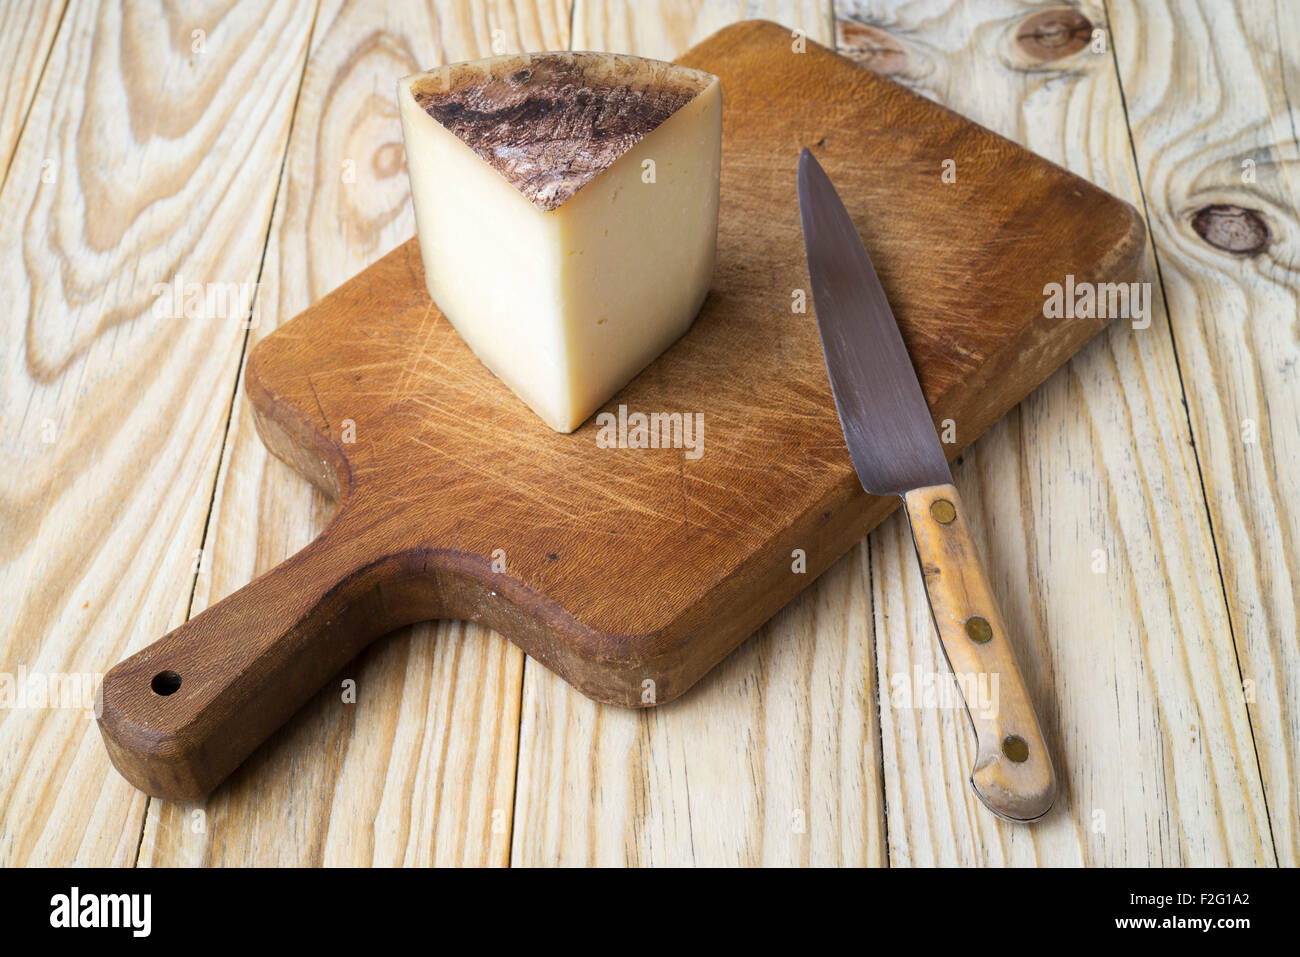 Cheese and knife on cutting board Stock Photo